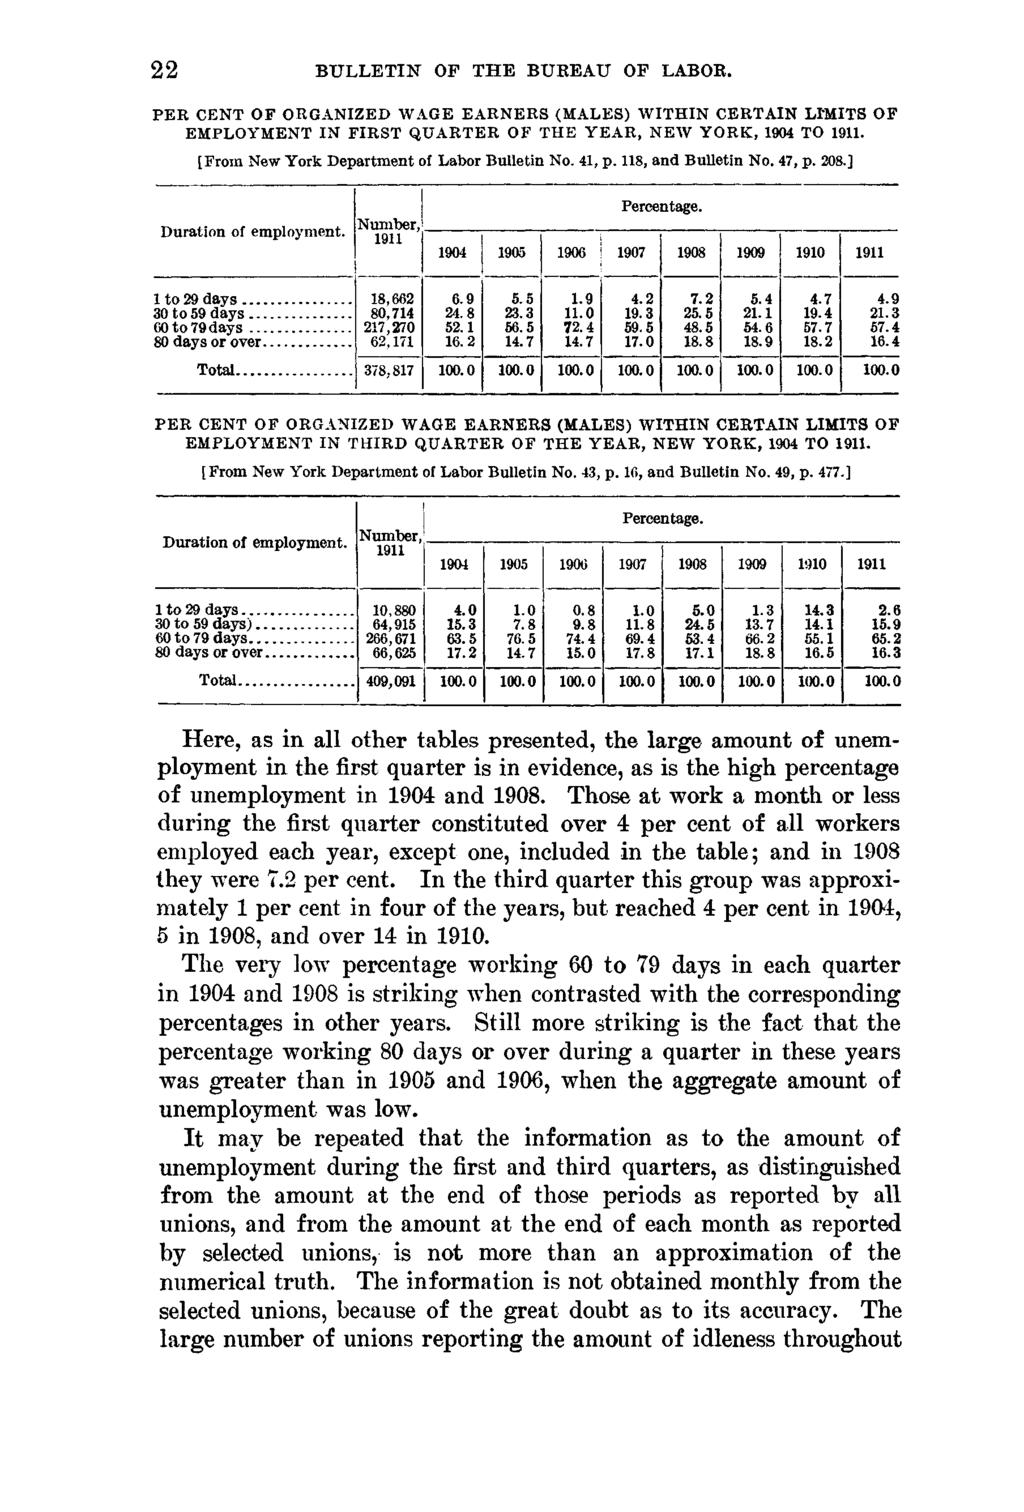 22 BULLETIN OF THE BUREAU OF LABOR. PER CENT OF ORGANIZED WAGE EARNERS (MALES) WITHIN CERTAIN LPMITS OF EMPLOYMENT IN FIRST QUARTER OF THE YEAR, NEW YORK, 1904 TO 1911.